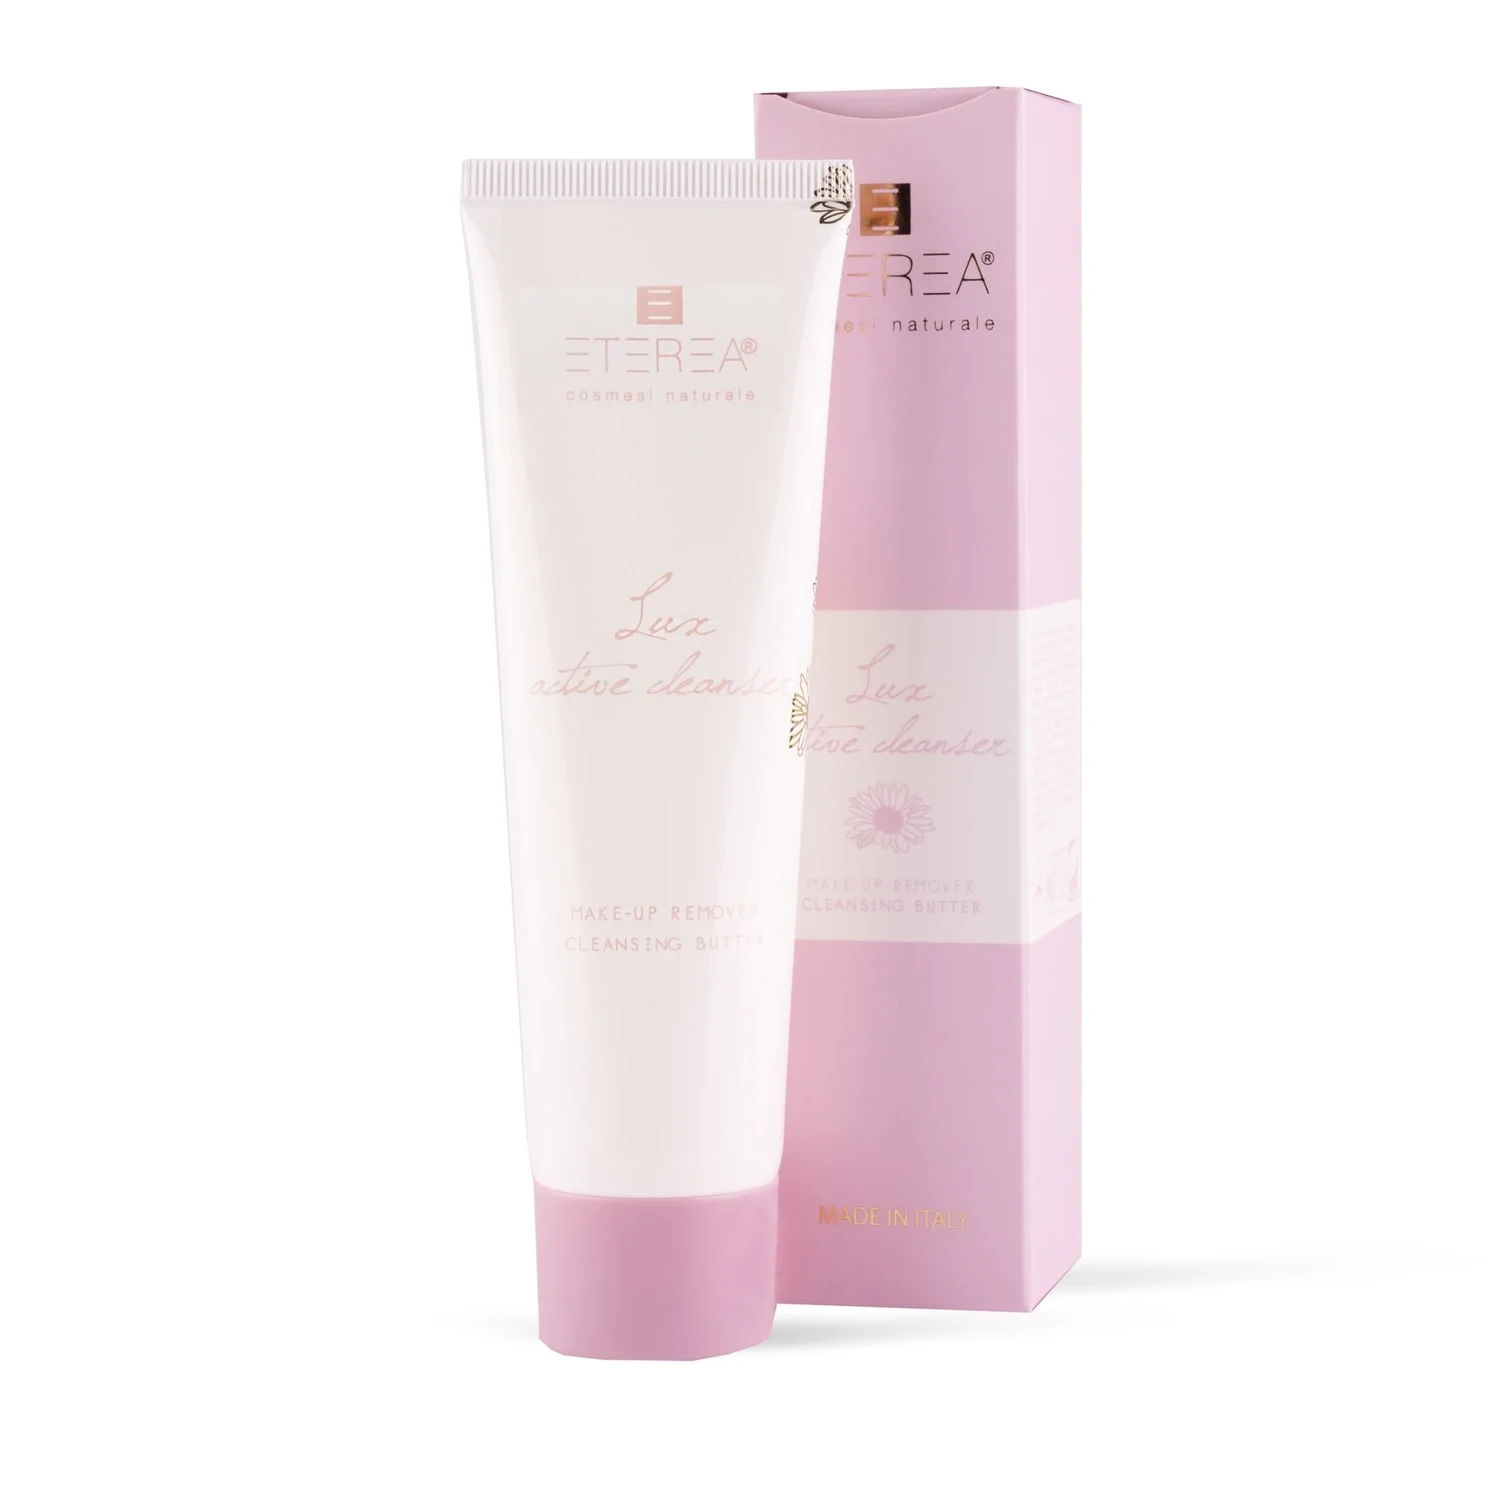 LUX ACTIVE CLEANSER Eterea Cosmesi Naturale